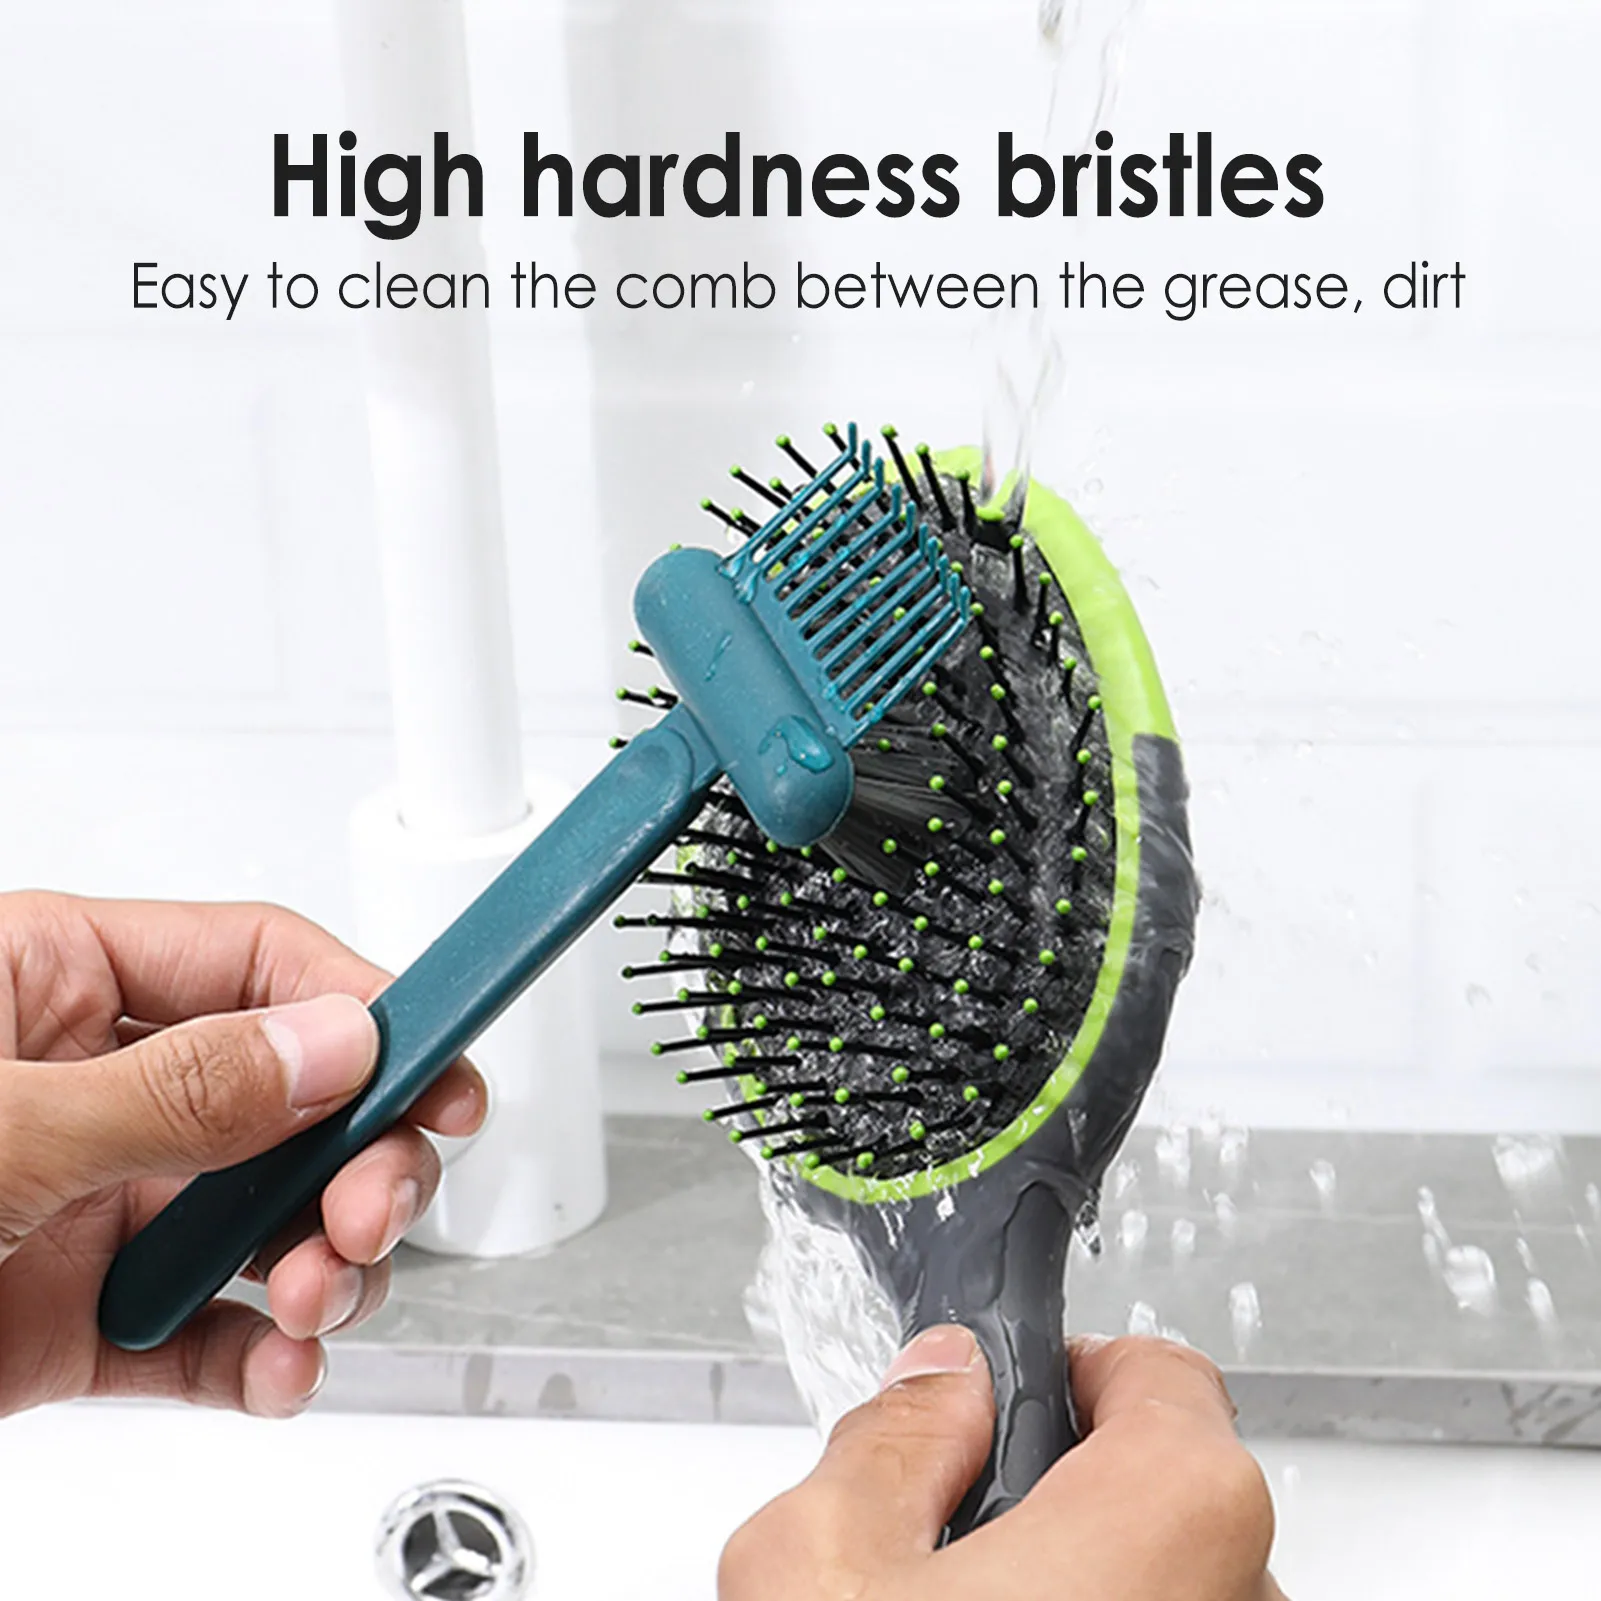 

Comb Cleaner Brush Kit 2 In 1 Handy Hair Brush Dirt Remover With Ergonomic Handle Quick Hair Dust Lint Cleaning Tools For